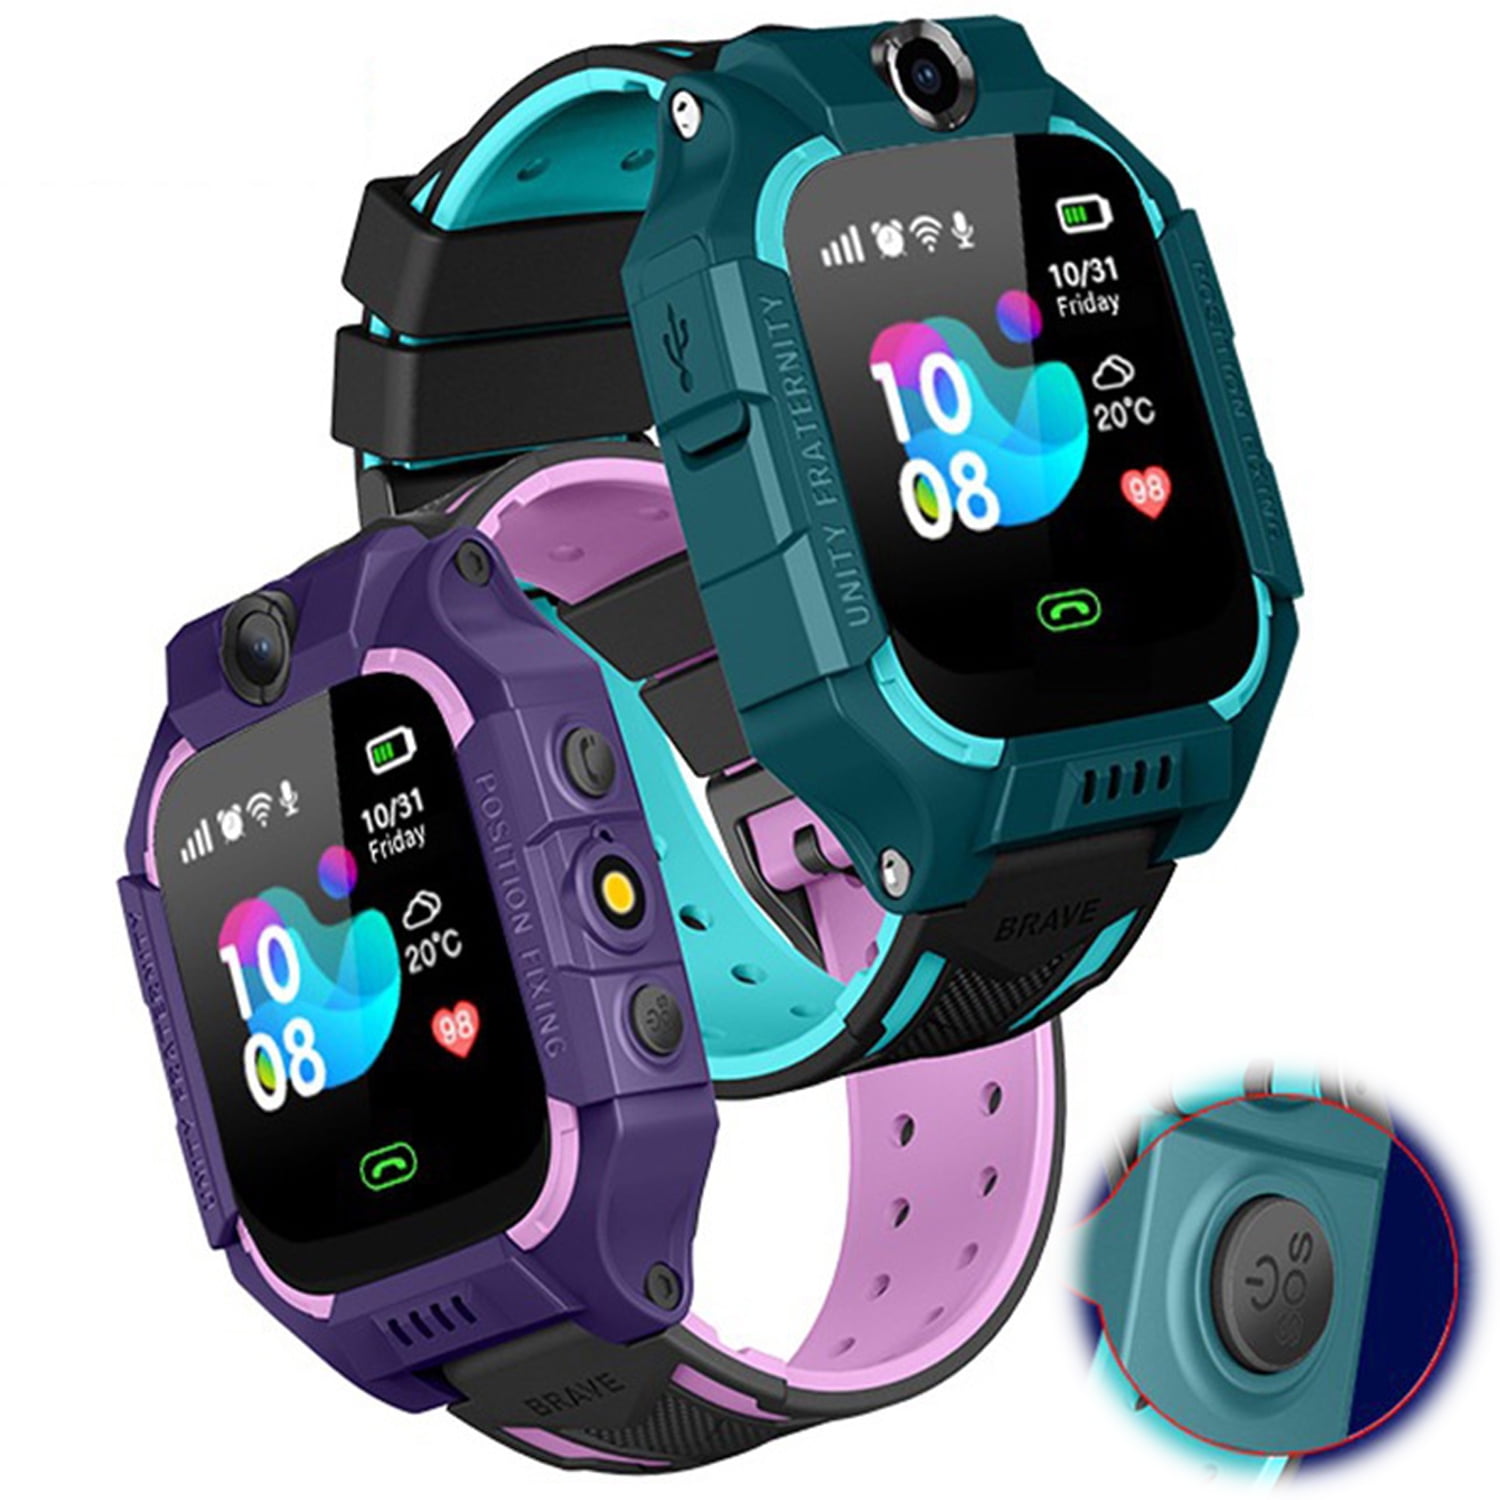 X83 GPS smartwatch for Alzheimer's patients with SOS function